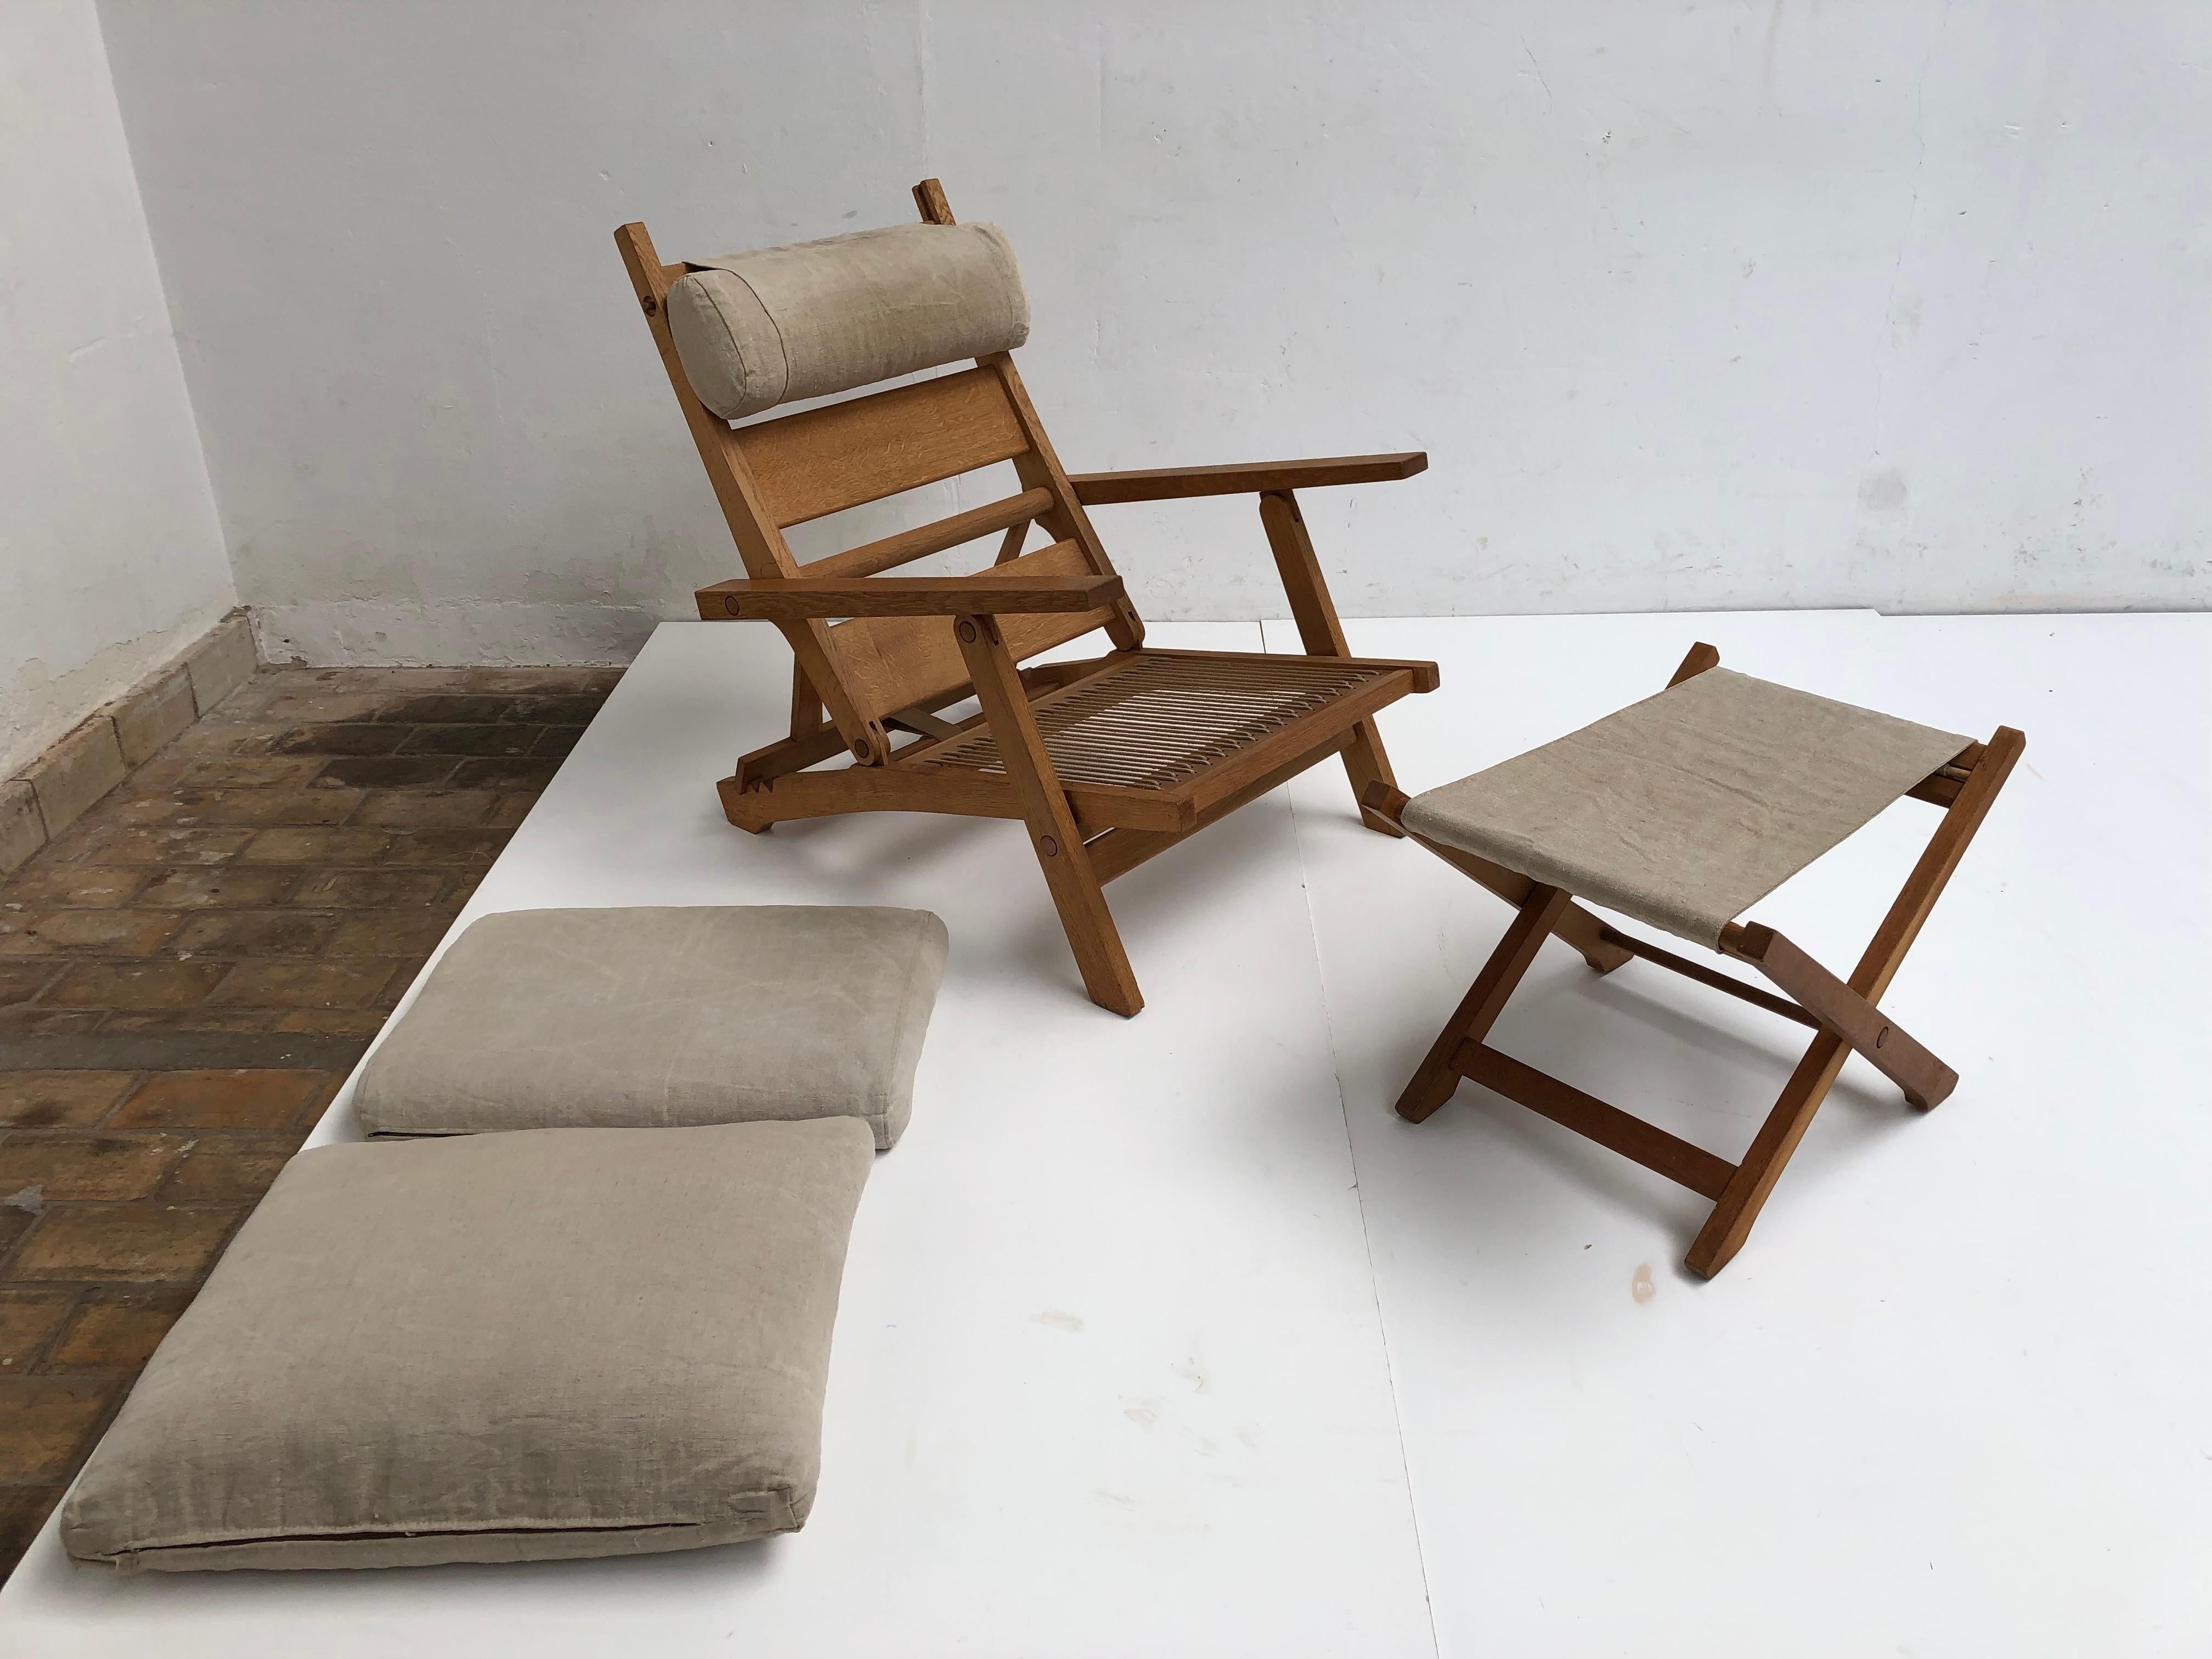 Rare Wegner AP71 folding lounge chair designed in 1968

This design by Hans Wegner perfectly shows the amazing and skilled Danish woodworker craftsmanship with the use of only wooden (dowel) connections 

Adjustable back- and headrest in three